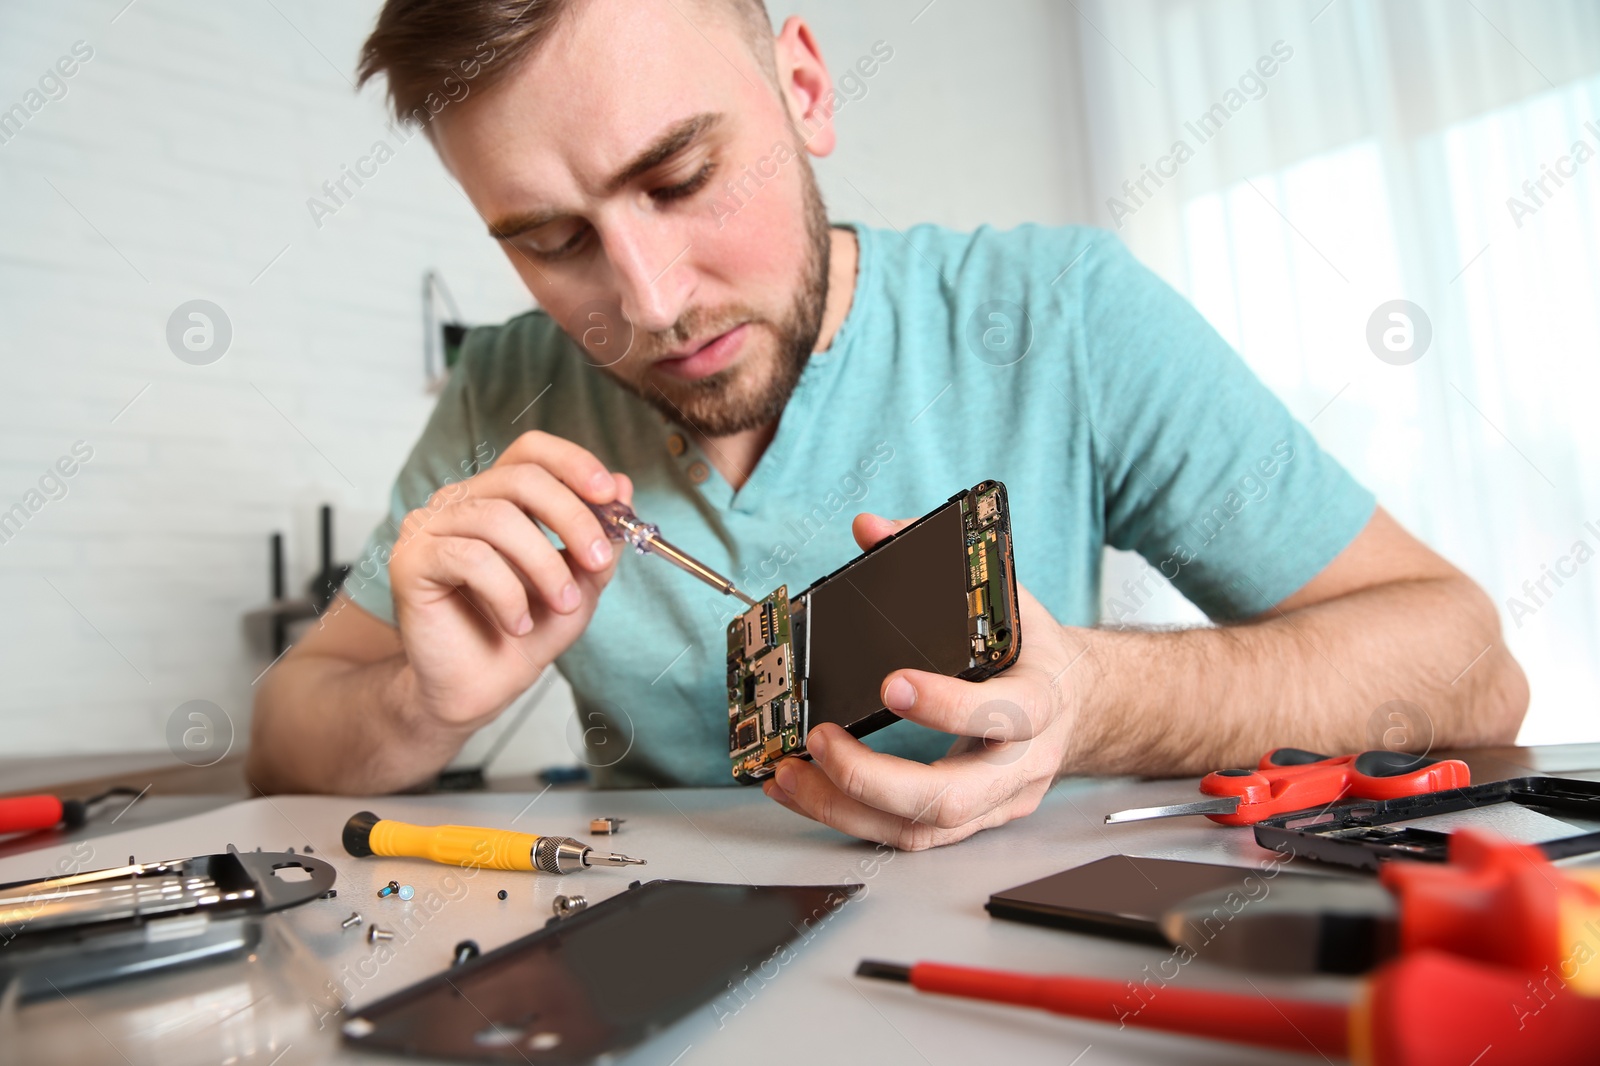 Photo of Technician repairing mobile phone at table in workshop, closeup